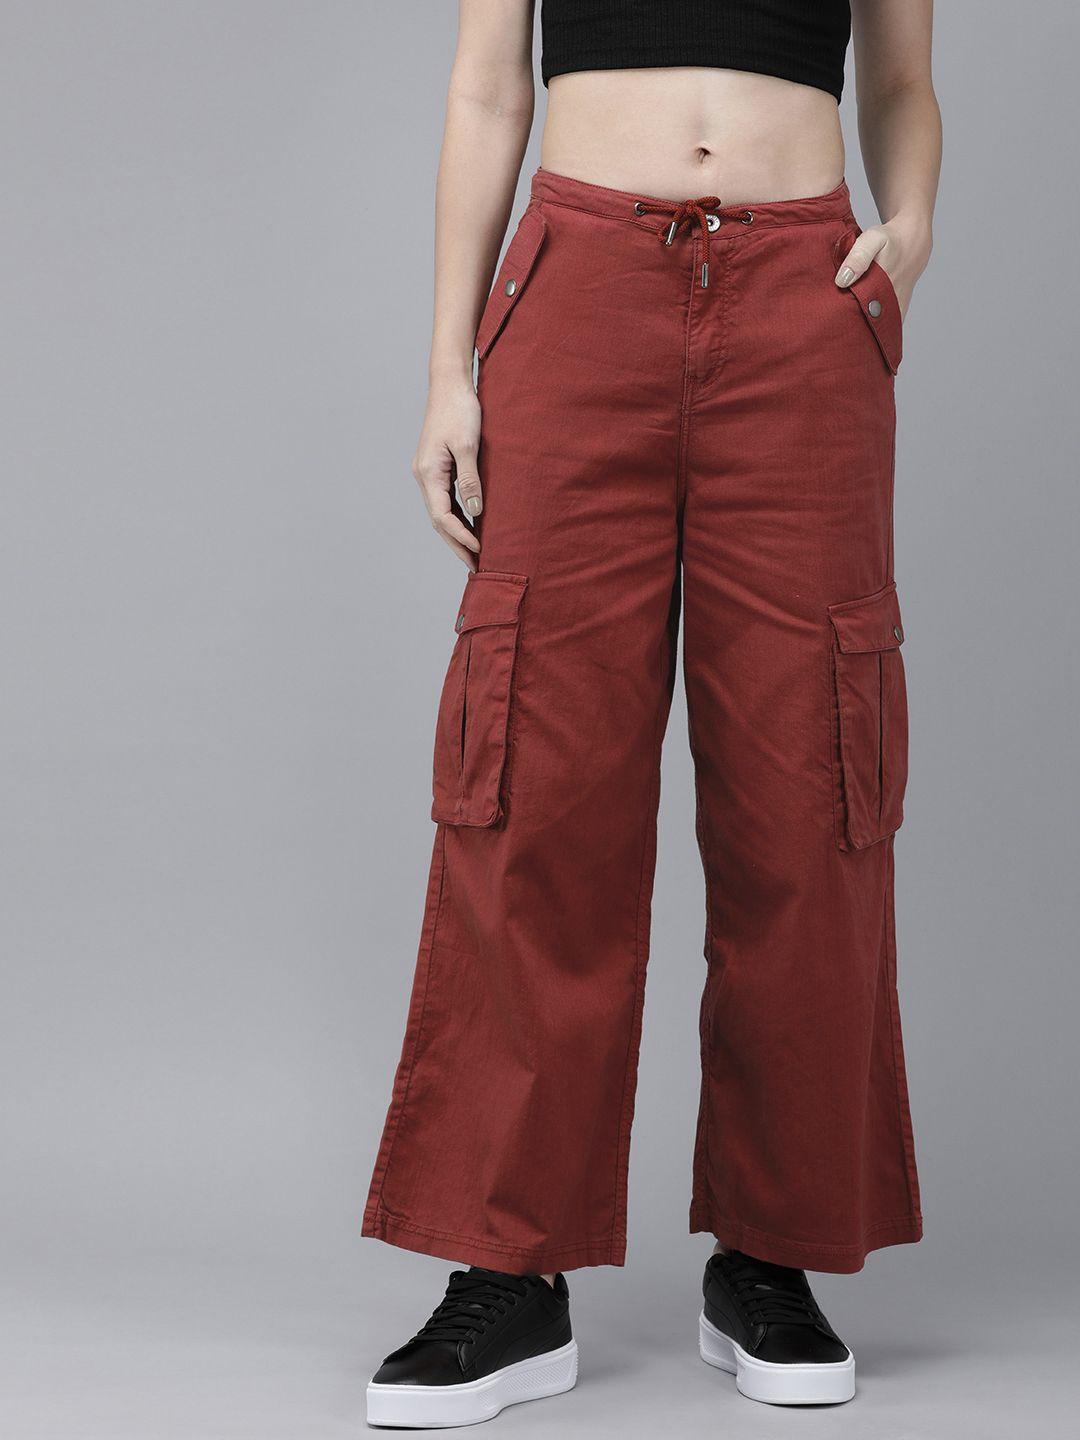 the roadster lifestyle co. women straight fit cargos trousers